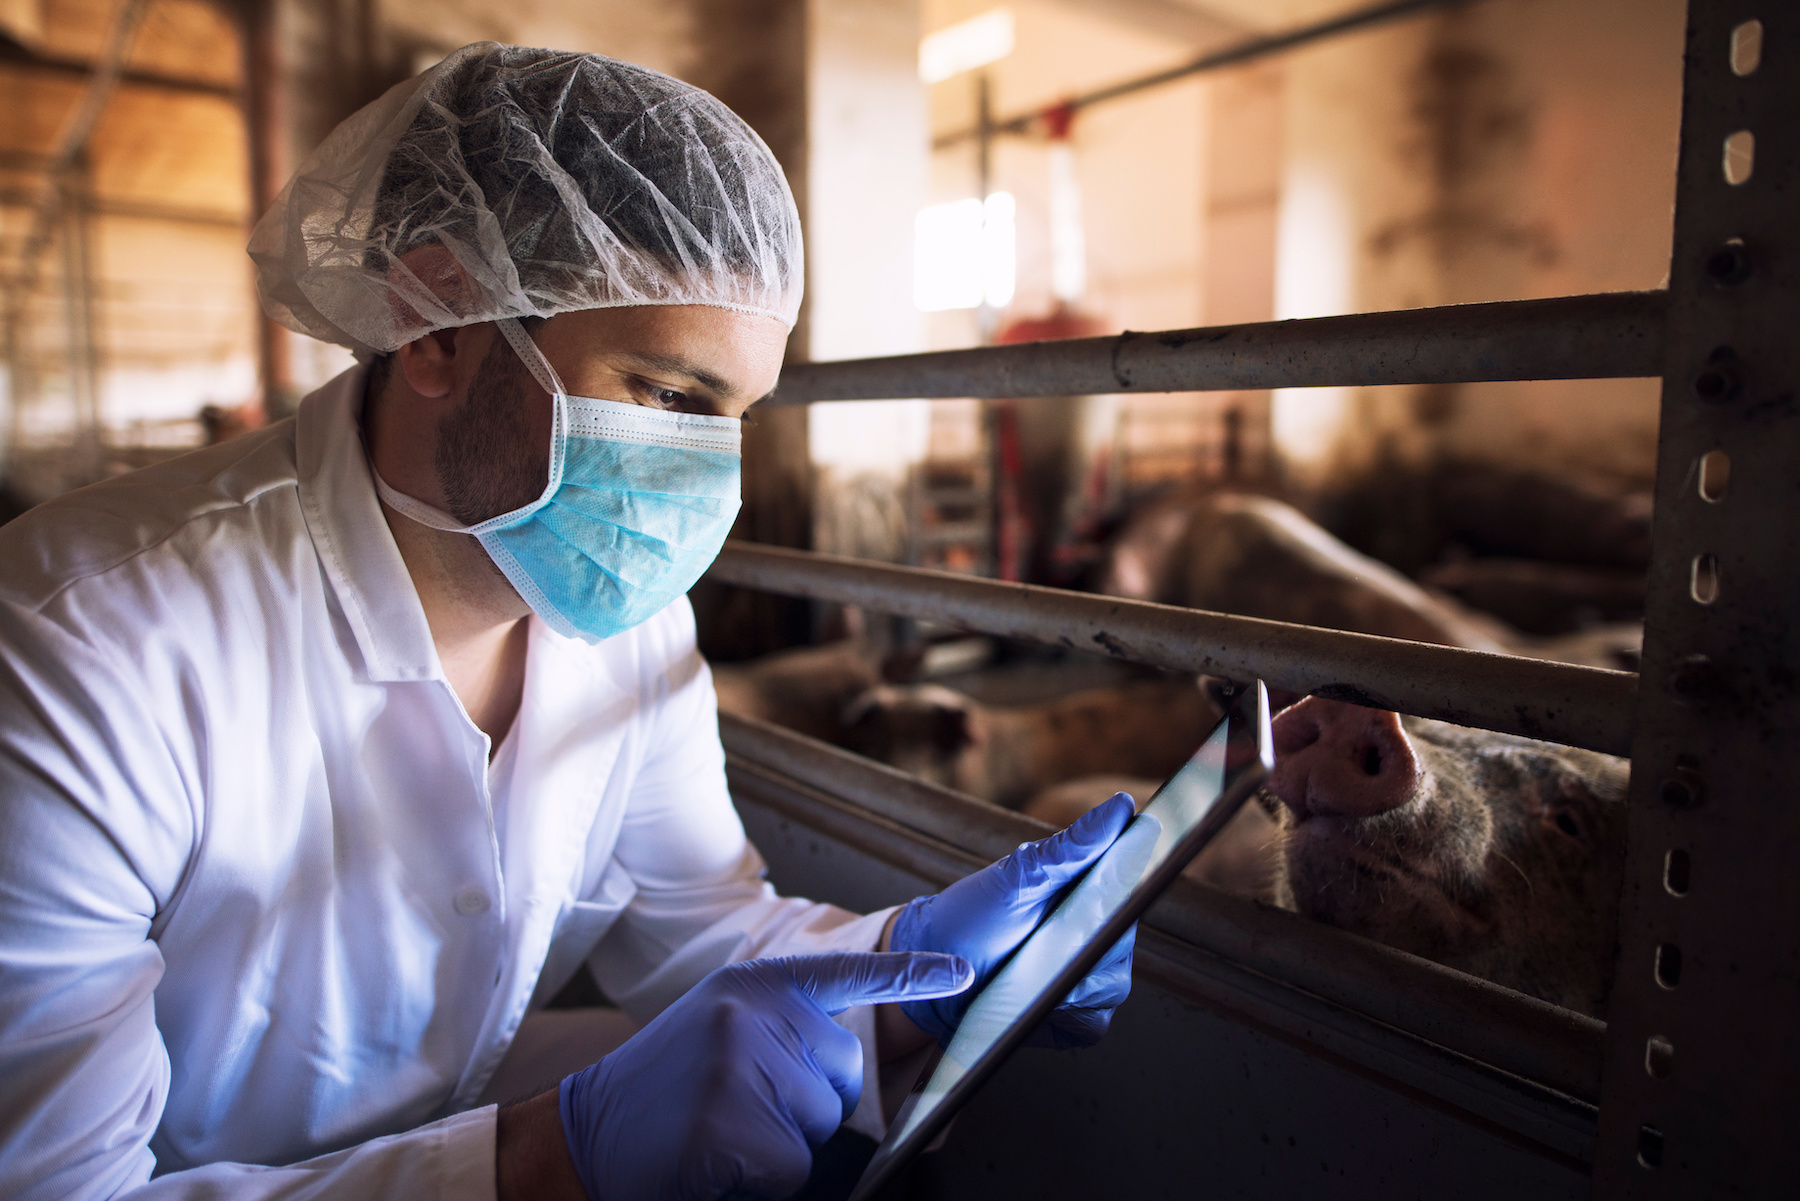 Veterinarian using iPad while observing pigs